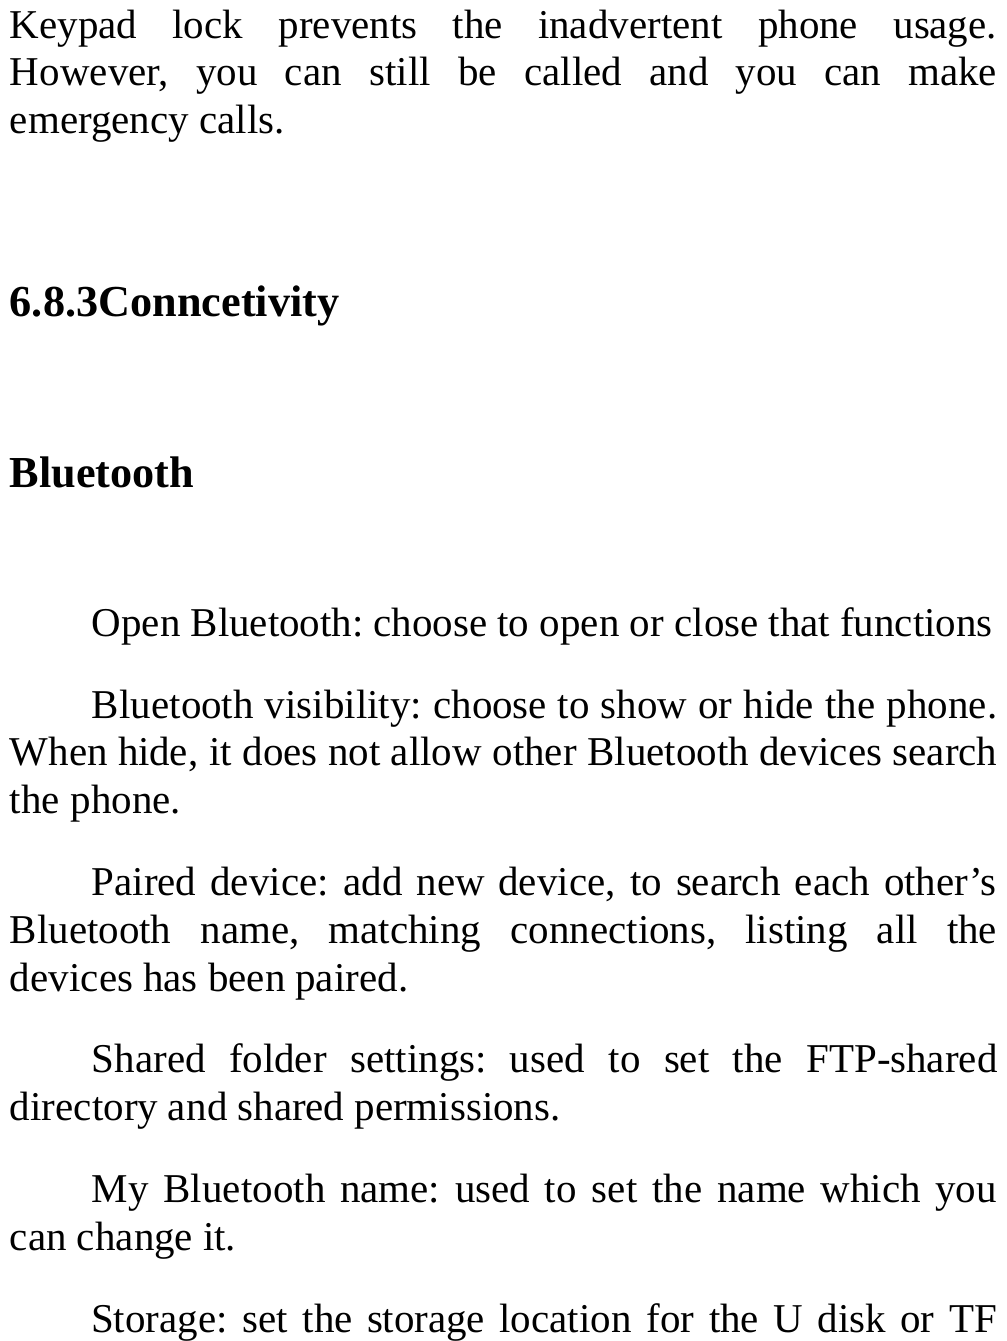  Keypad lock prevents the inadvertent phone usage. However, you can still be called and you can make emergency calls.  6.8.3Conncetivity Bluetooth  Open Bluetooth: choose to open or close that functions Bluetooth visibility: choose to show or hide the phone. When hide, it does not allow other Bluetooth devices search the phone. Paired device: add new device, to search each other’s Bluetooth name, matching connections, listing all the devices has been paired. Shared folder settings: used to set the FTP-shared directory and shared permissions. My Bluetooth name: used to set the name which you can change it.   Storage: set the storage location for the U disk or TF 